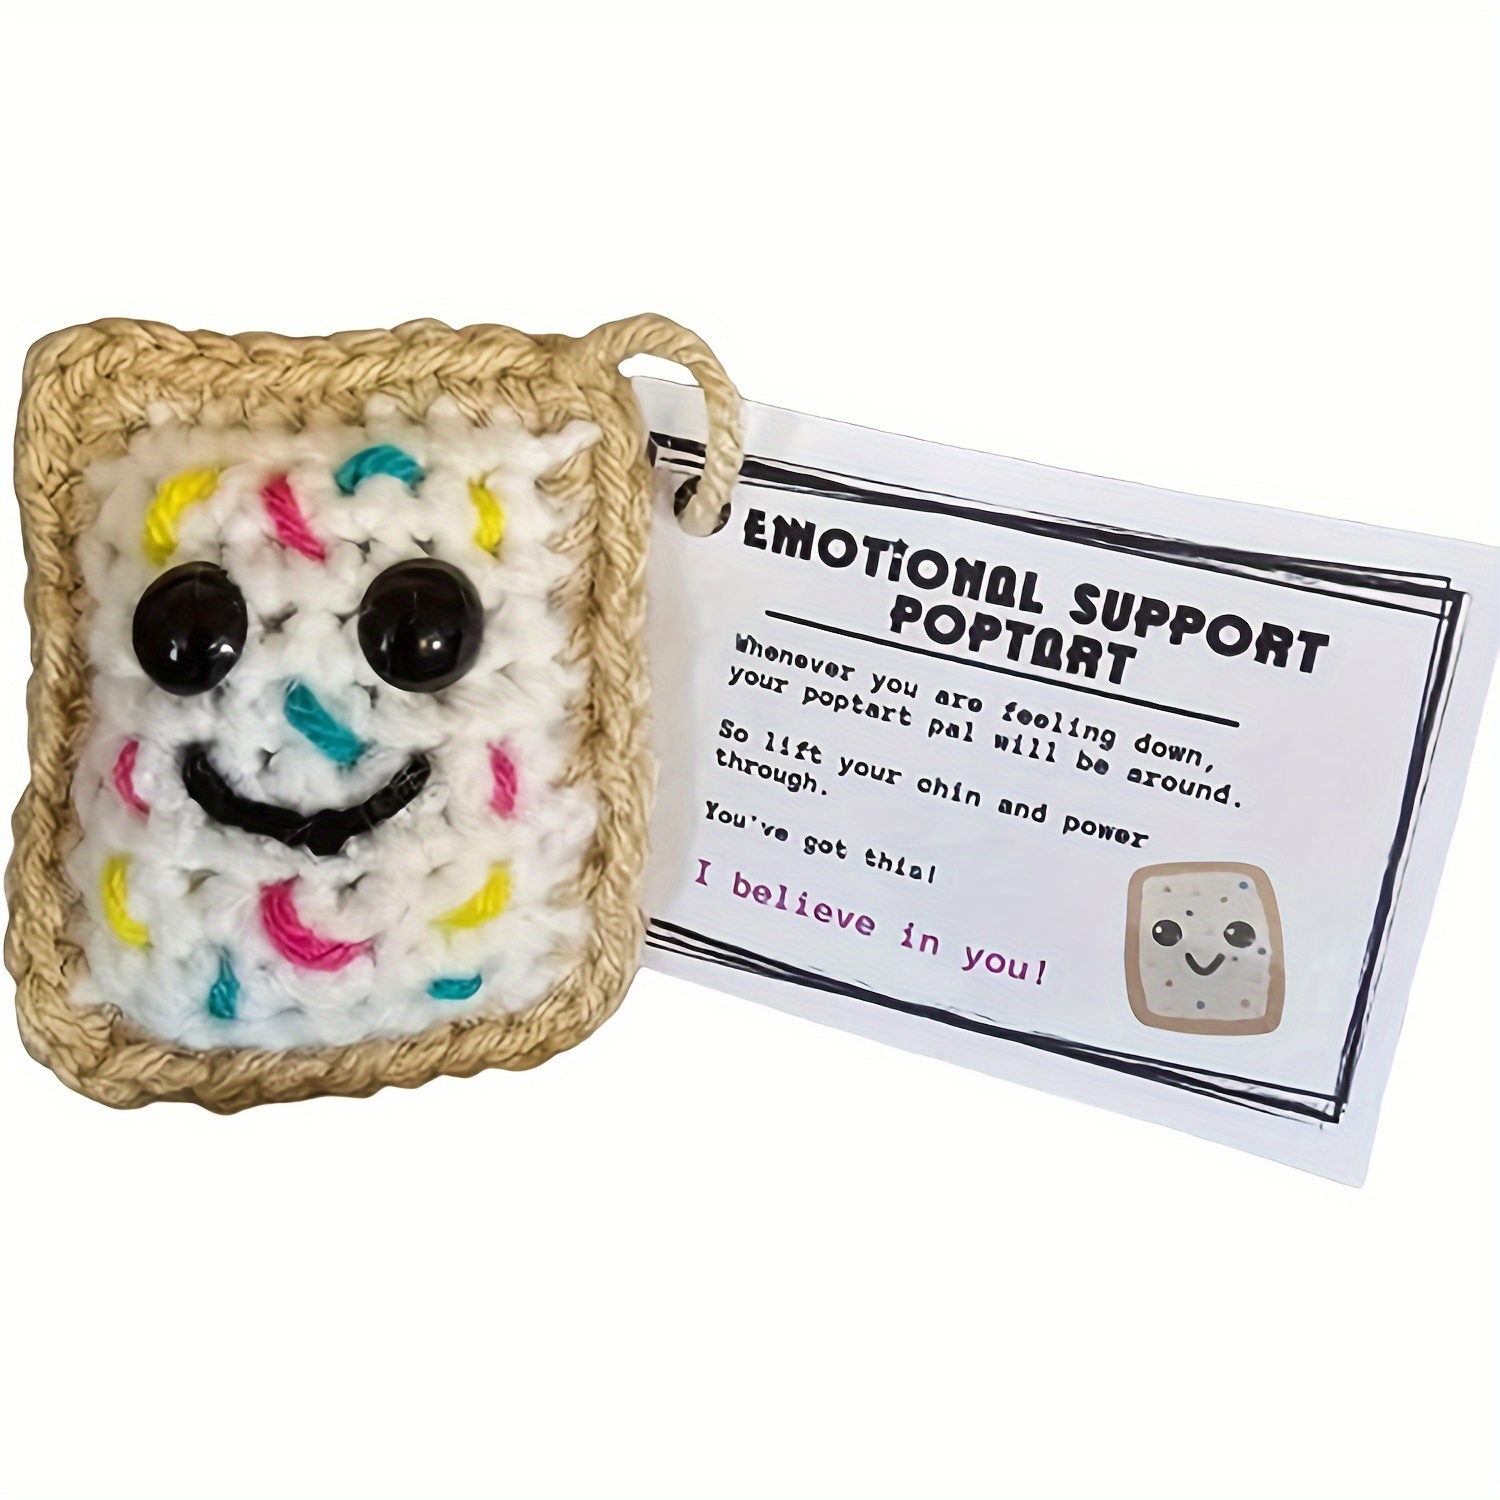 

Handmade Crochet Pop Pie Keychain - Unique Emotional Support Gift With Positive Card, Perfect For Birthdays & Holidays